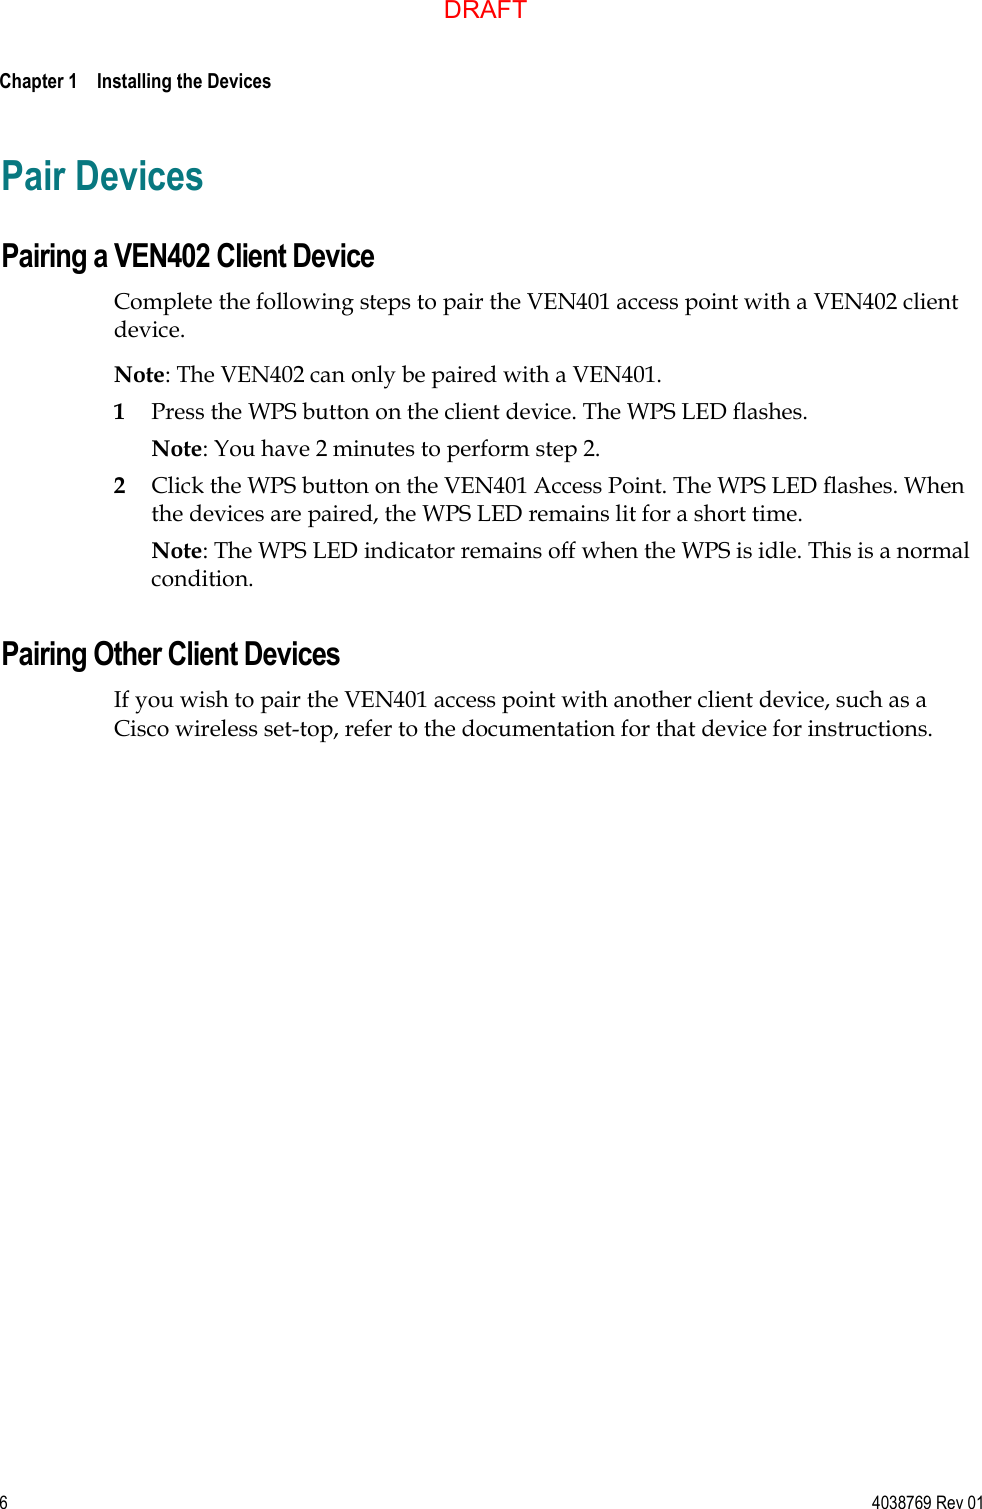  Chapter 1    Installing the Devices     6  4038769 Rev 01 Pair Devices Pairing a VEN402 Client Device Complete the following steps to pair the VEN401 access point with a VEN402 client device. Note: The VEN402 can only be paired with a VEN401. 1 Press the WPS button on the client device. The WPS LED flashes. Note: You have 2 minutes to perform step 2. 2 Click the WPS button on the VEN401 Access Point. The WPS LED flashes. When the devices are paired, the WPS LED remains lit for a short time. Note: The WPS LED indicator remains off when the WPS is idle. This is a normal condition. Pairing Other Client Devices If you wish to pair the VEN401 access point with another client device, such as a Cisco wireless set-top, refer to the documentation for that device for instructions.  DRAFT